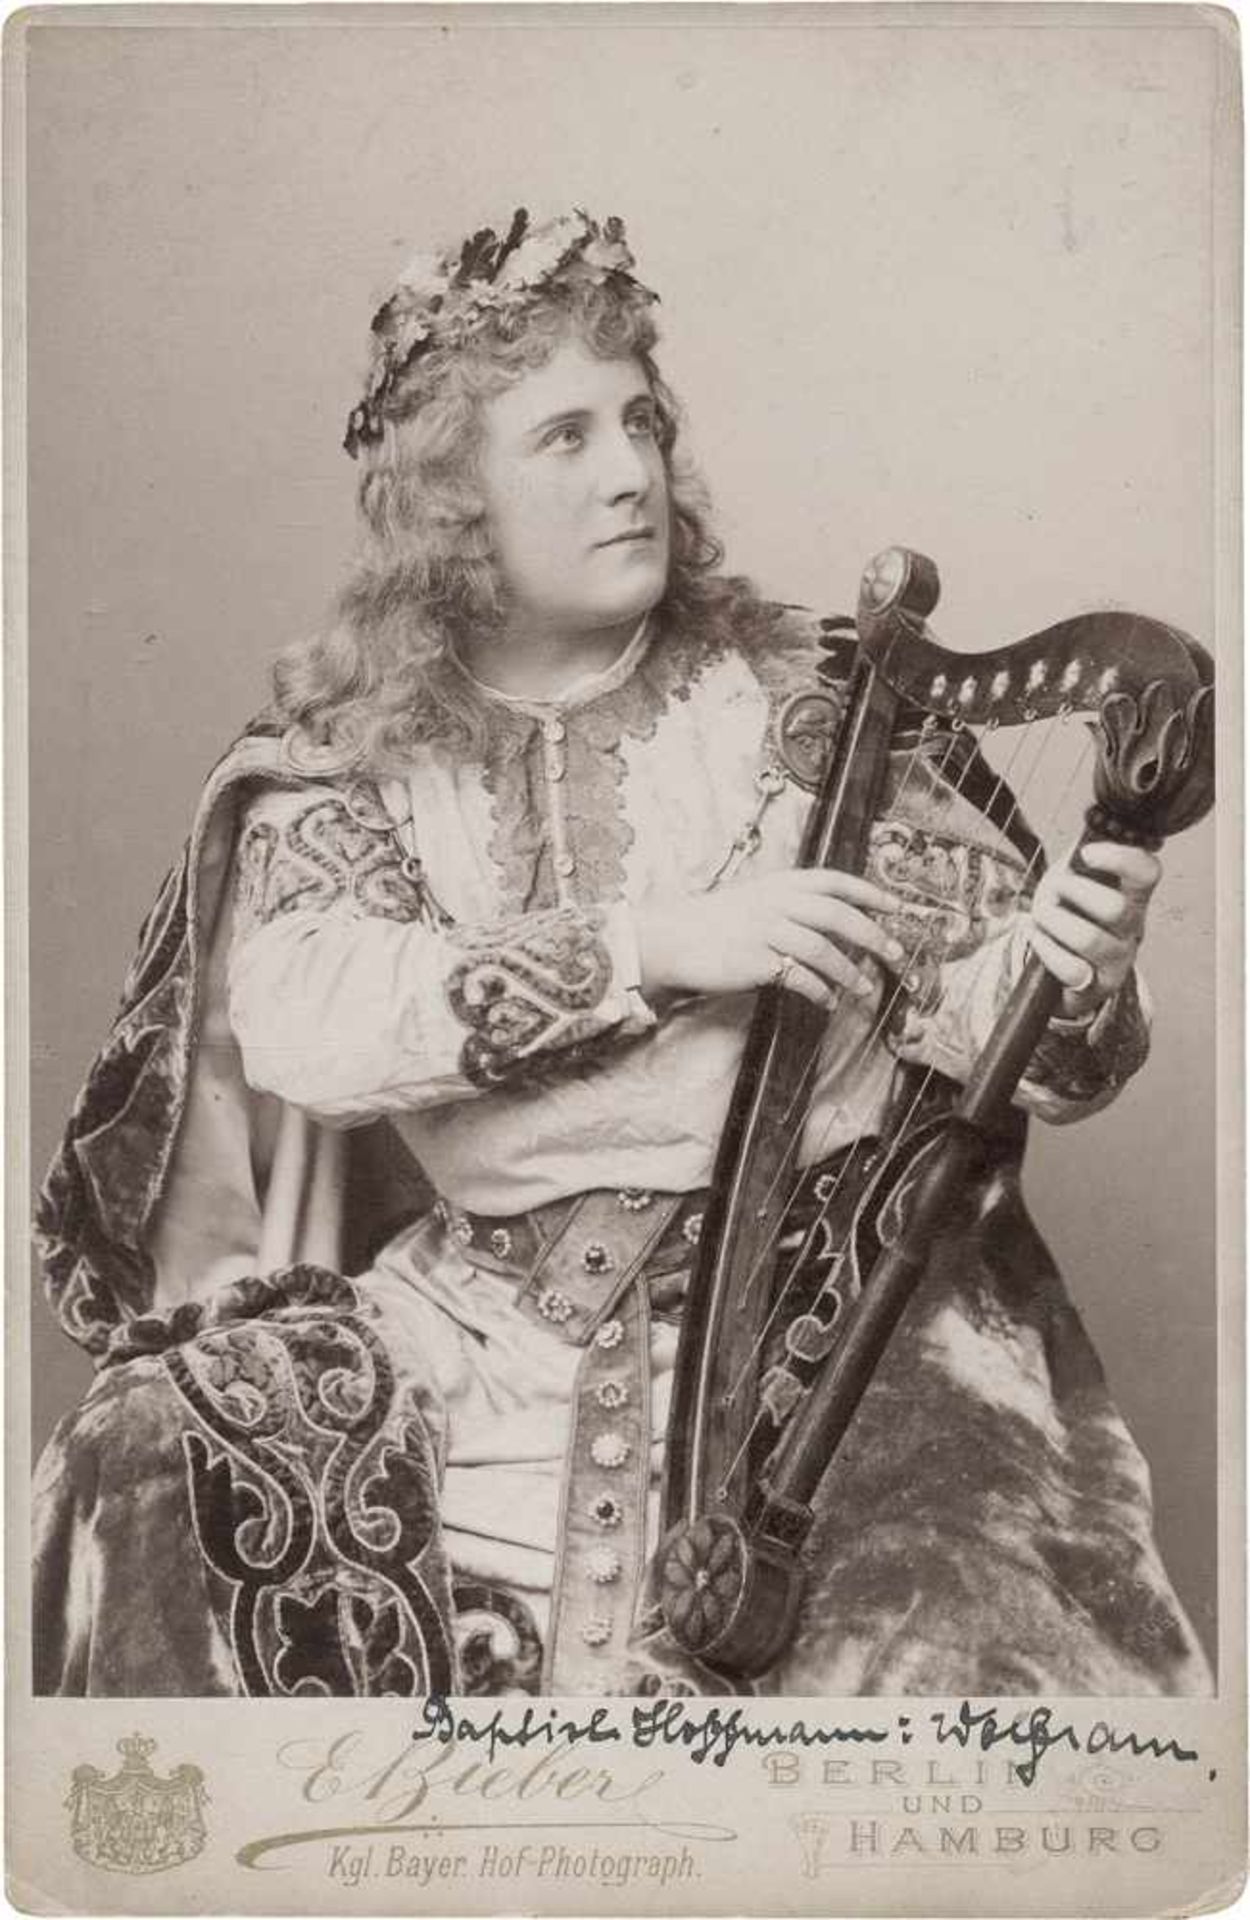 Bayreuth Festival 1899: Costume portraits of singers and actors of the Bayreuth Festival